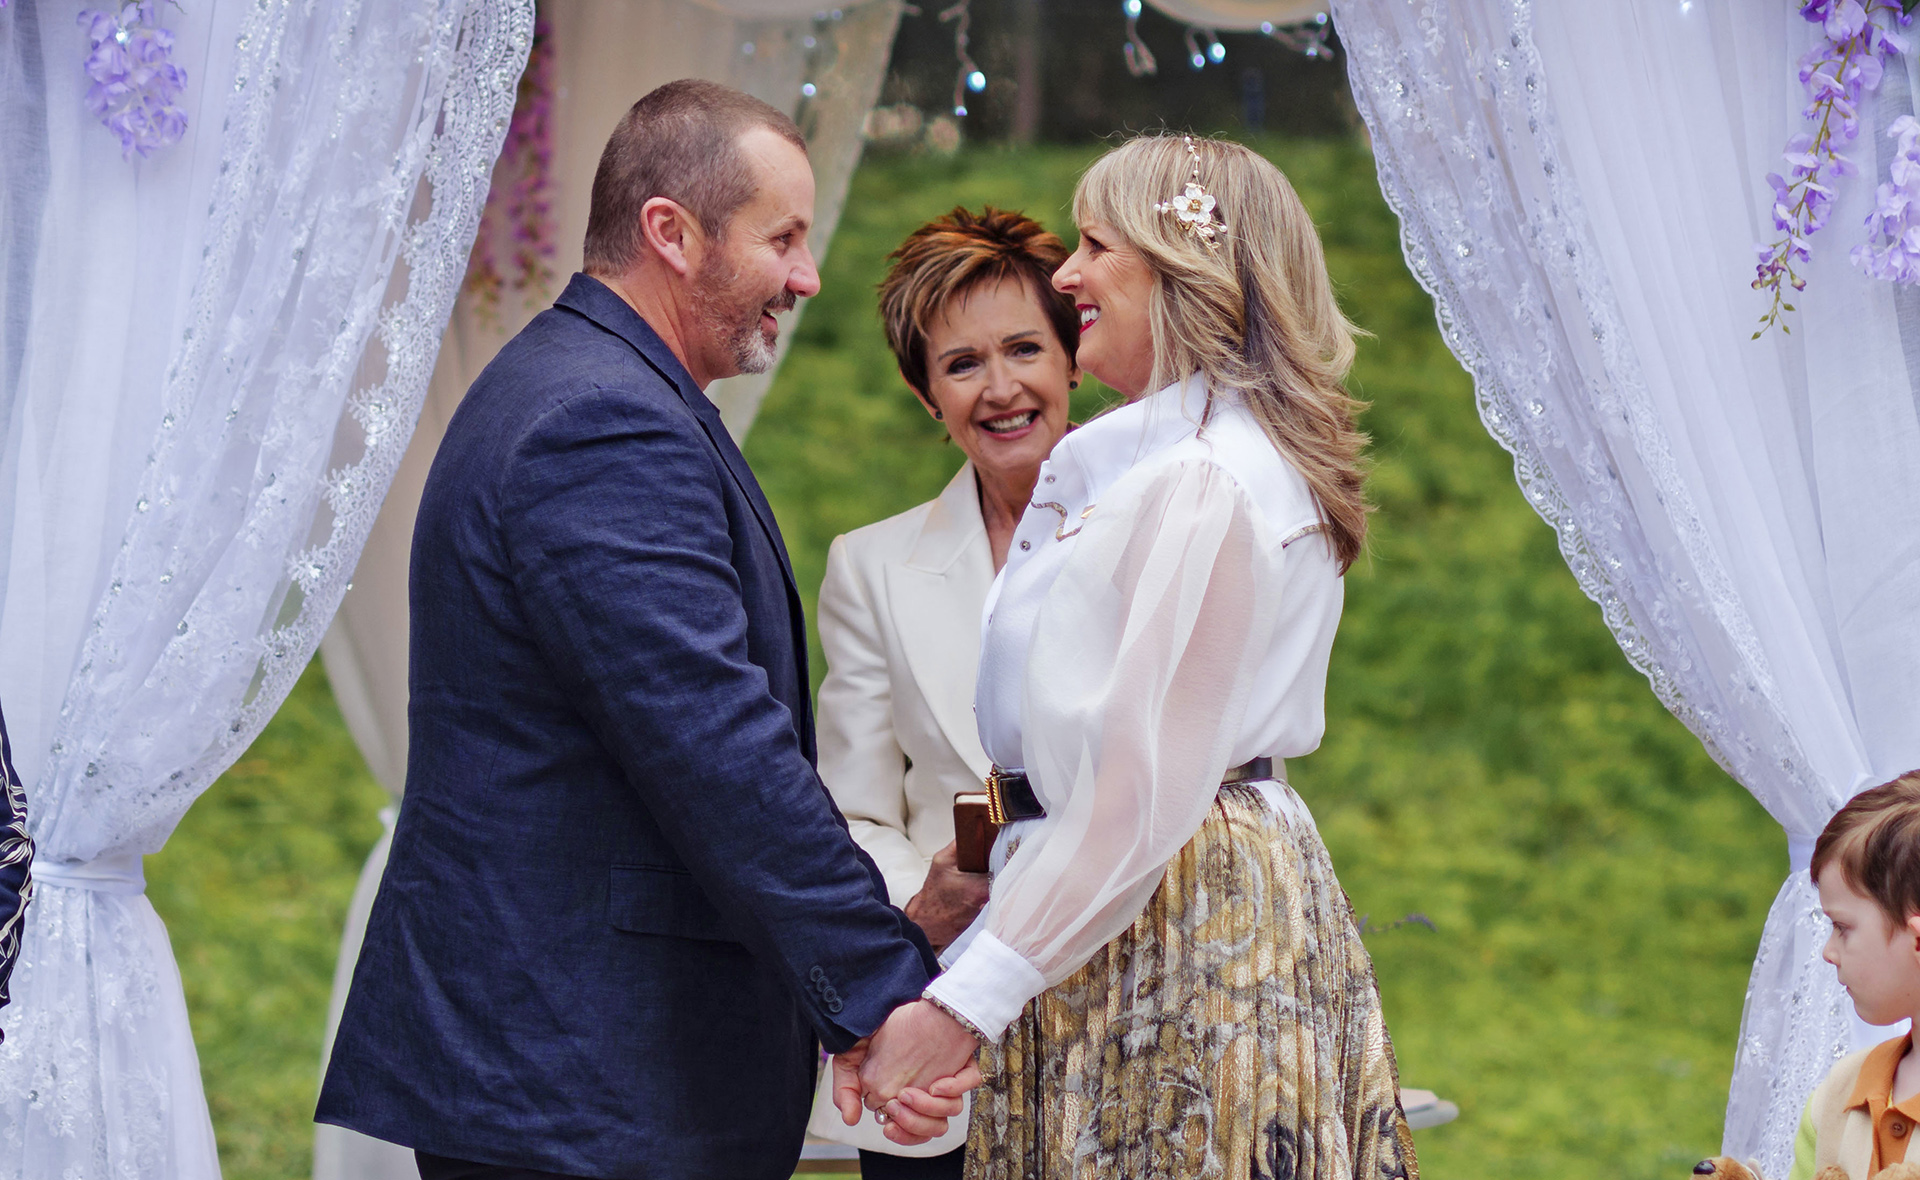 EXCLUSIVE: Toadie and Mel tie the knot on Neighbours – but their big day doesn’t go according to plan